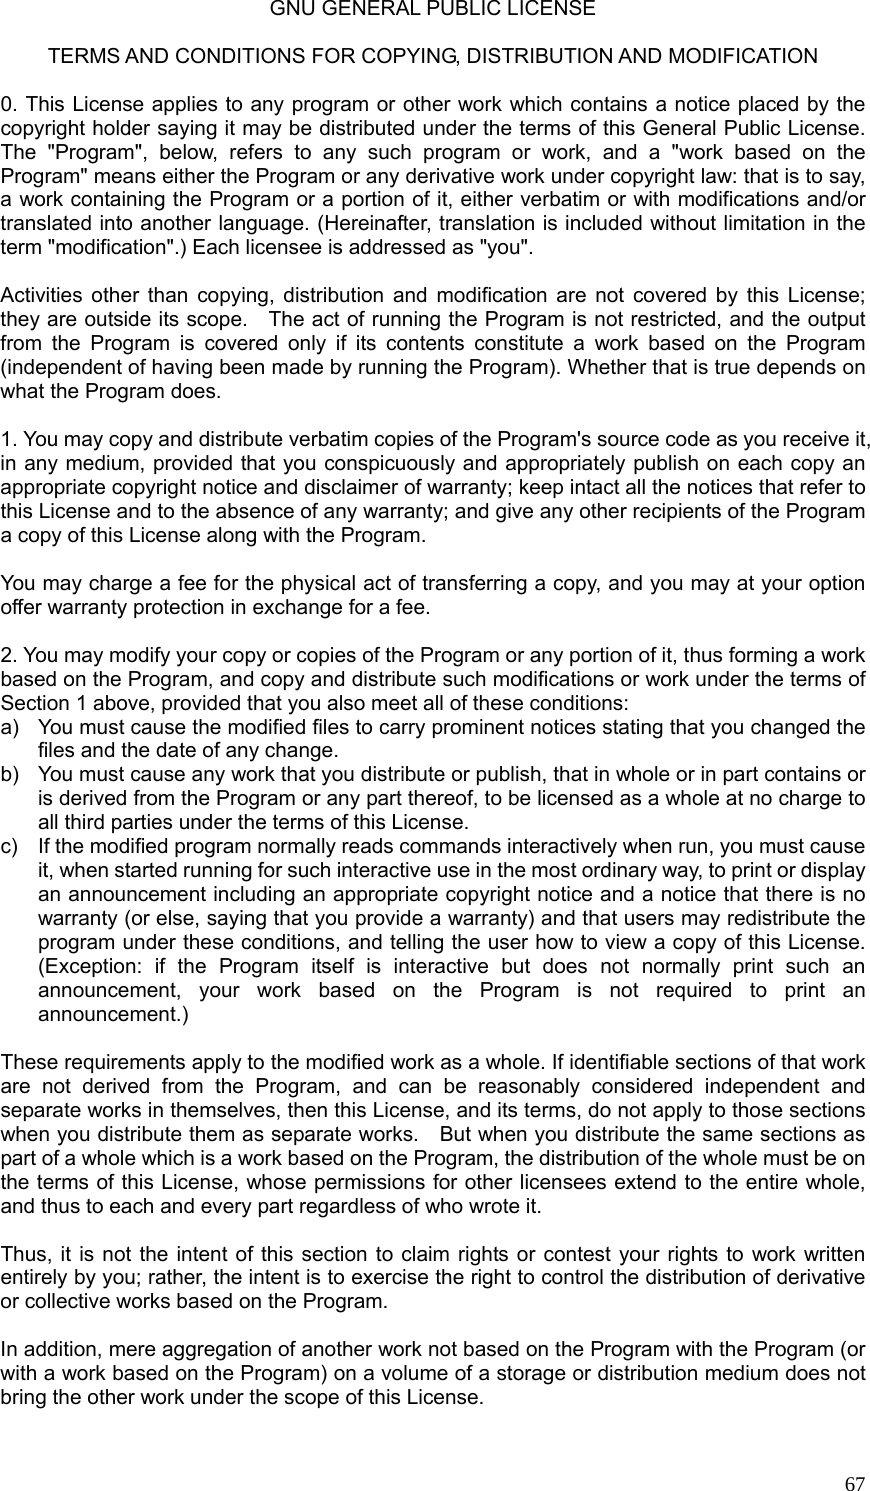  67GNU GENERAL PUBLIC LICENSE  TERMS AND CONDITIONS FOR COPYING, DISTRIBUTION AND MODIFICATION  0. This License applies to any program or other work which contains a notice placed by the copyright holder saying it may be distributed under the terms of this General Public License. The &quot;Program&quot;, below, refers to any such program or work, and a &quot;work based on the Program&quot; means either the Program or any derivative work under copyright law: that is to say, a work containing the Program or a portion of it, either verbatim or with modifications and/or translated into another language. (Hereinafter, translation is included without limitation in the term &quot;modification&quot;.) Each licensee is addressed as &quot;you&quot;.  Activities other than copying, distribution and modification are not covered by this License; they are outside its scope.    The act of running the Program is not restricted, and the output from the Program is covered only if its contents constitute a work based on the Program (independent of having been made by running the Program). Whether that is true depends on what the Program does.  1. You may copy and distribute verbatim copies of the Program&apos;s source code as you receive it, in any medium, provided that you conspicuously and appropriately publish on each copy an appropriate copyright notice and disclaimer of warranty; keep intact all the notices that refer to this License and to the absence of any warranty; and give any other recipients of the Program a copy of this License along with the Program.  You may charge a fee for the physical act of transferring a copy, and you may at your option offer warranty protection in exchange for a fee.  2. You may modify your copy or copies of the Program or any portion of it, thus forming a work based on the Program, and copy and distribute such modifications or work under the terms of Section 1 above, provided that you also meet all of these conditions: a)  You must cause the modified files to carry prominent notices stating that you changed the files and the date of any change. b)  You must cause any work that you distribute or publish, that in whole or in part contains or is derived from the Program or any part thereof, to be licensed as a whole at no charge to all third parties under the terms of this License. c)  If the modified program normally reads commands interactively when run, you must cause it, when started running for such interactive use in the most ordinary way, to print or display an announcement including an appropriate copyright notice and a notice that there is no warranty (or else, saying that you provide a warranty) and that users may redistribute the program under these conditions, and telling the user how to view a copy of this License. (Exception: if the Program itself is interactive but does not normally print such an announcement, your work based on the Program is not required to print an announcement.)  These requirements apply to the modified work as a whole. If identifiable sections of that work are not derived from the Program, and can be reasonably considered independent and separate works in themselves, then this License, and its terms, do not apply to those sections when you distribute them as separate works.    But when you distribute the same sections as part of a whole which is a work based on the Program, the distribution of the whole must be on the terms of this License, whose permissions for other licensees extend to the entire whole, and thus to each and every part regardless of who wrote it.  Thus, it is not the intent of this section to claim rights or contest your rights to work written entirely by you; rather, the intent is to exercise the right to control the distribution of derivative or collective works based on the Program.  In addition, mere aggregation of another work not based on the Program with the Program (or with a work based on the Program) on a volume of a storage or distribution medium does not bring the other work under the scope of this License.  